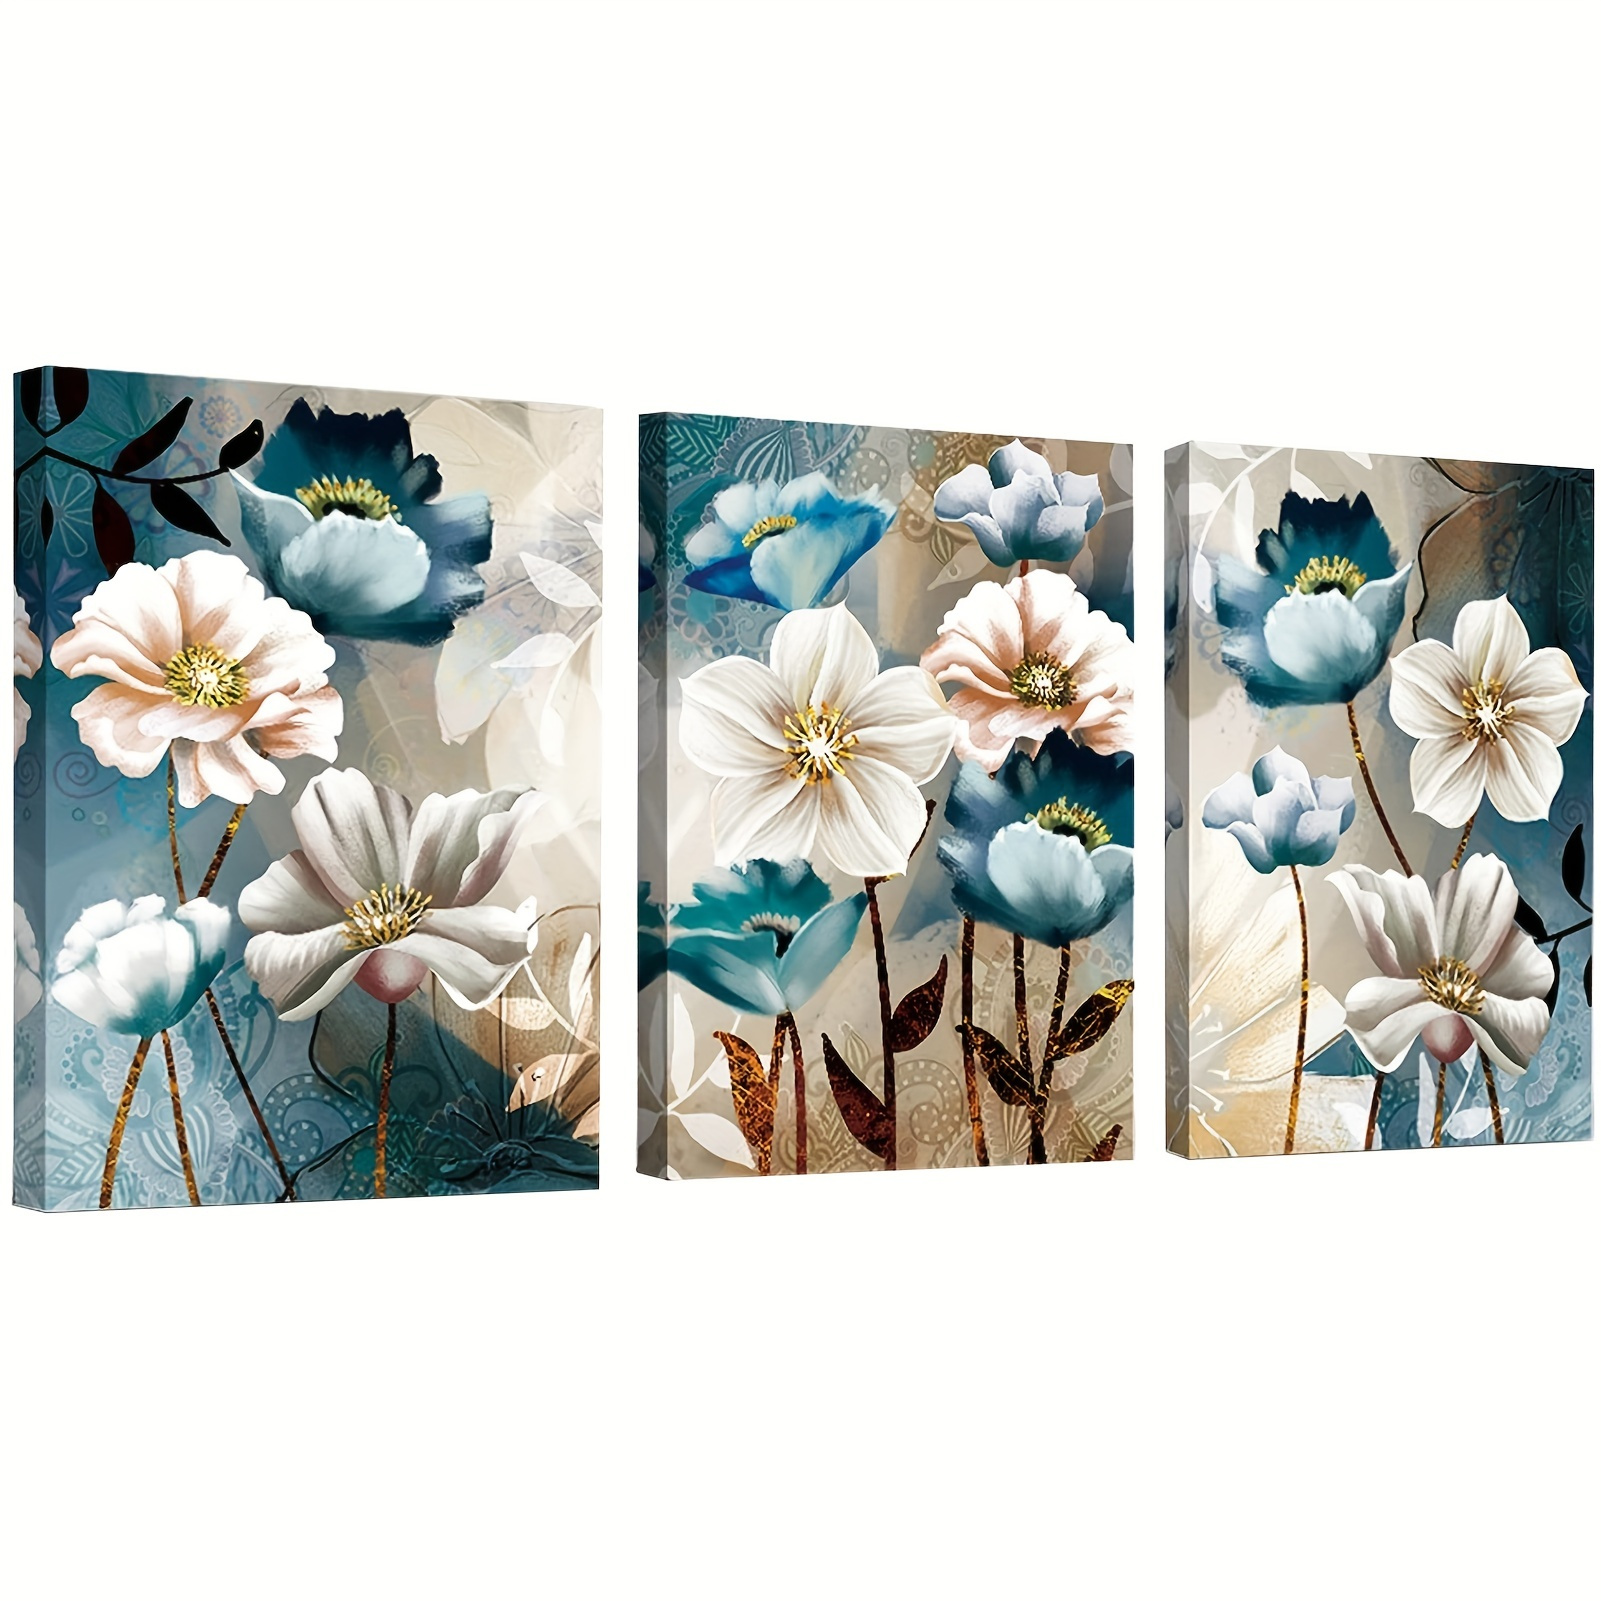 

3pcs 5d Diy Large Diamond Painting Kits For Adults ,11.8x15.7inch/30x40cm Lotus Round Full Diamond Diamond Art Kits Picture By Number Kits For Home Wall Decor Gifts Christmas Day, Halloween Day